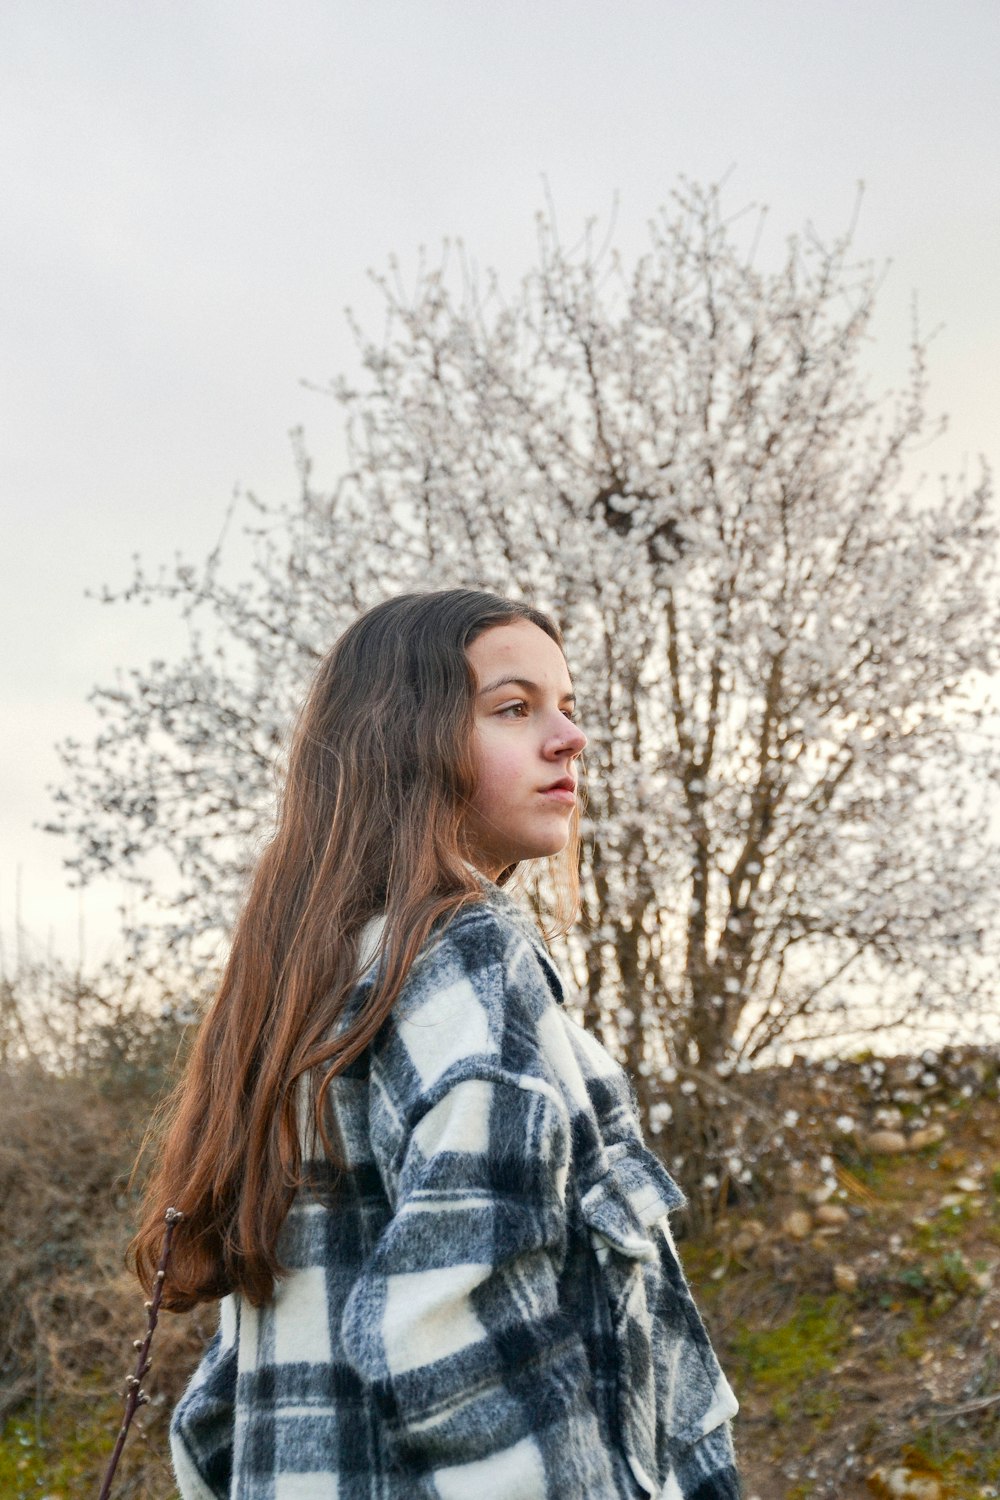 woman in black and white plaid shirt standing near bare trees during daytime